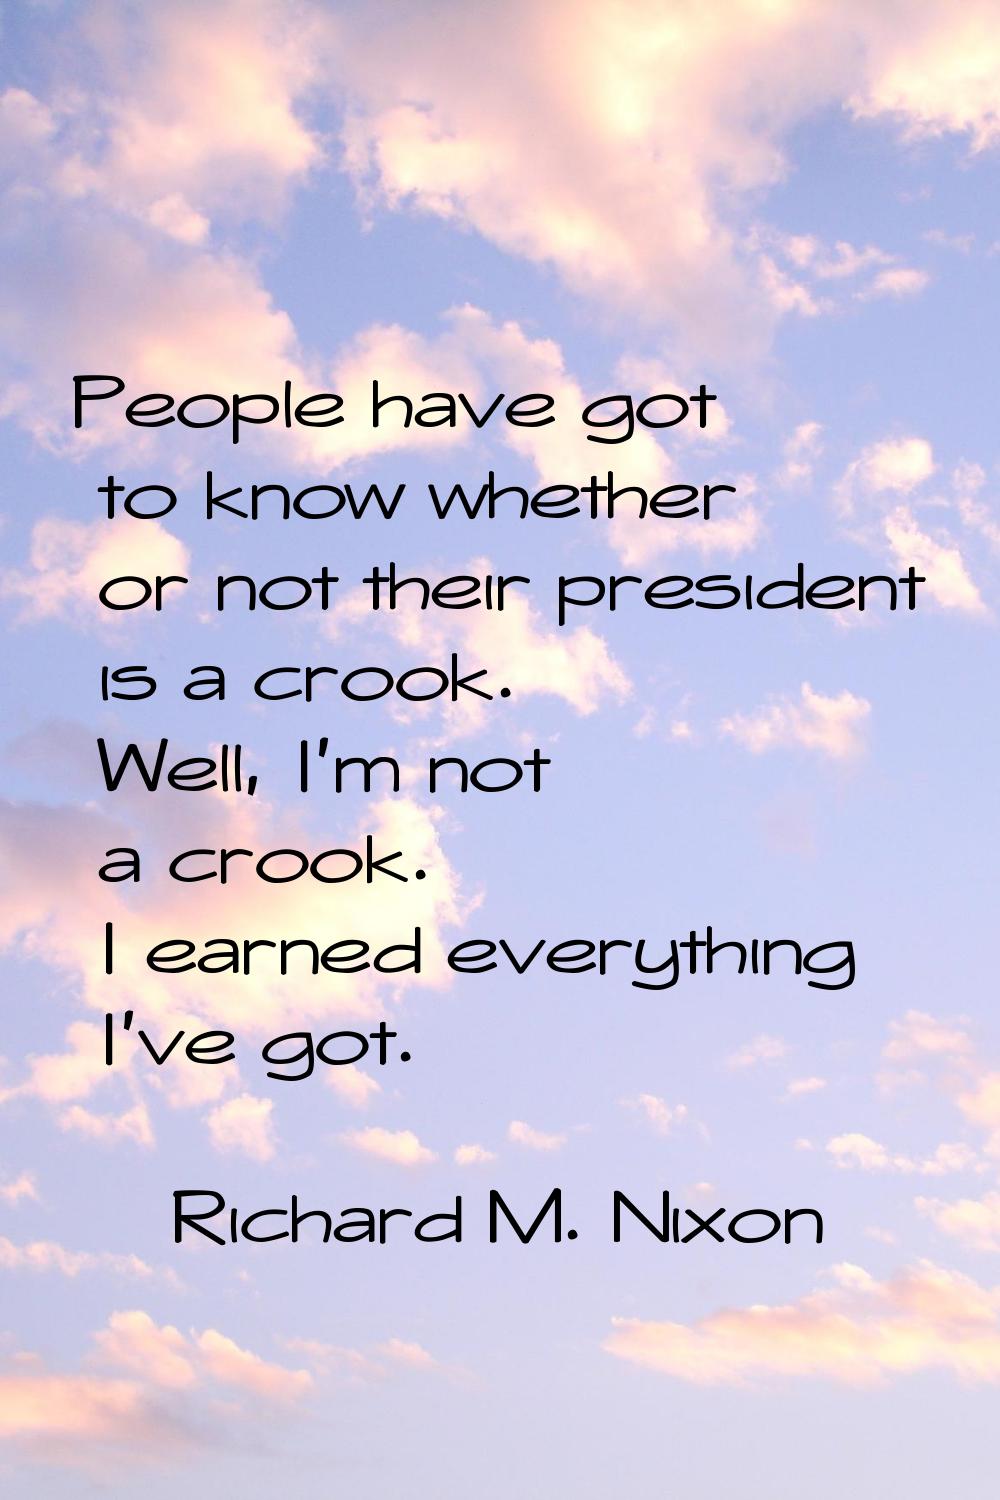 People have got to know whether or not their president is a crook. Well, I'm not a crook. I earned 